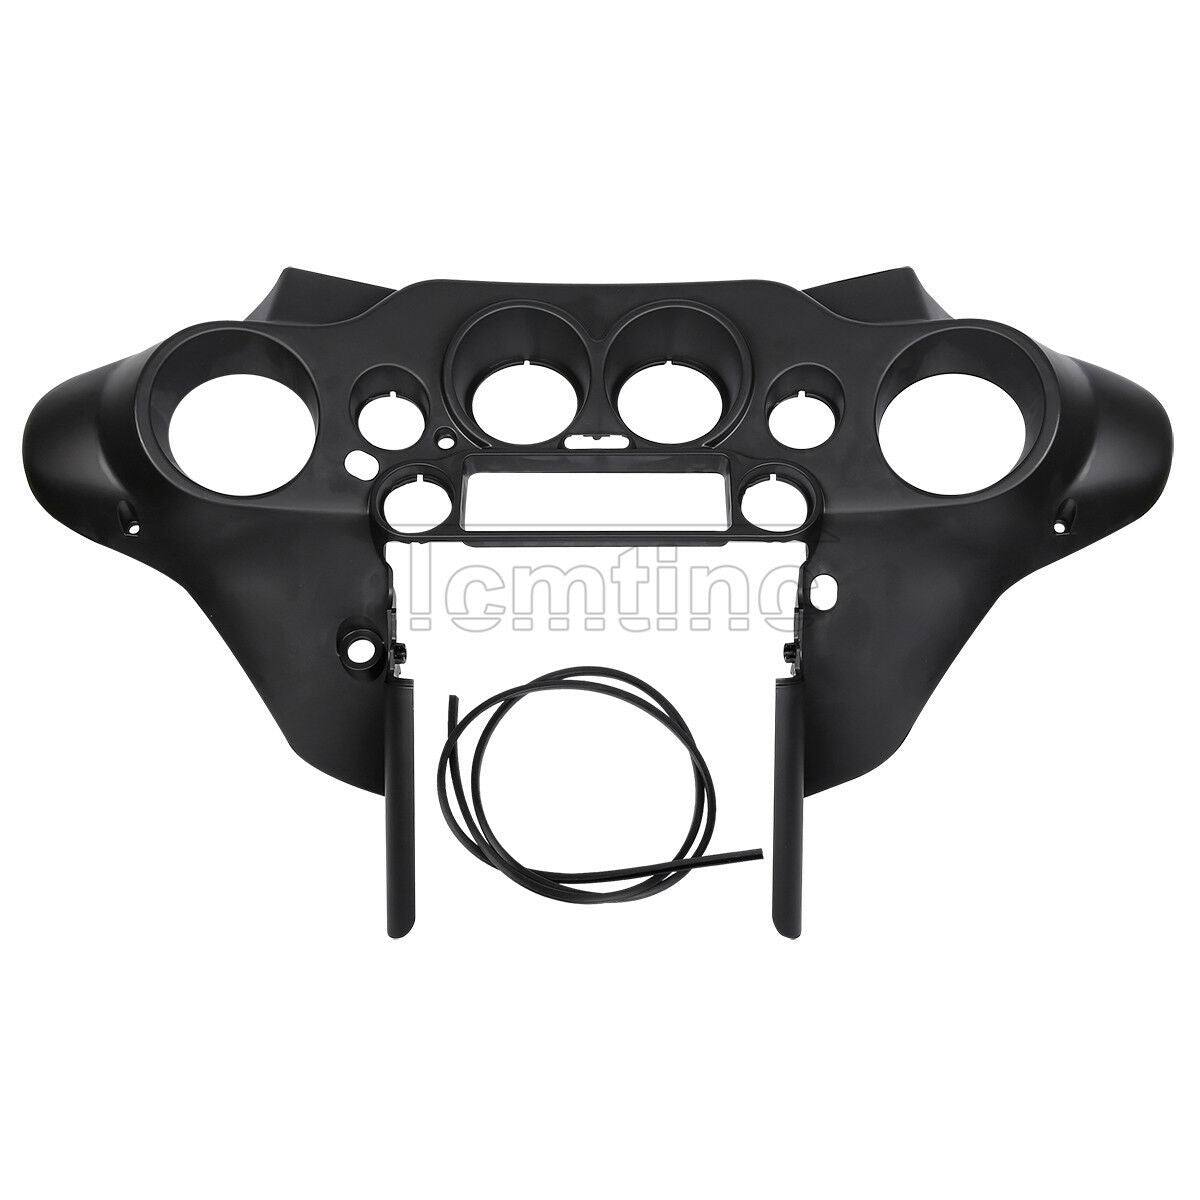 Speedometer Cover Cowl Inner Fairing For Harley Electra Street Glide FLHTC FLHX - Moto Life Products